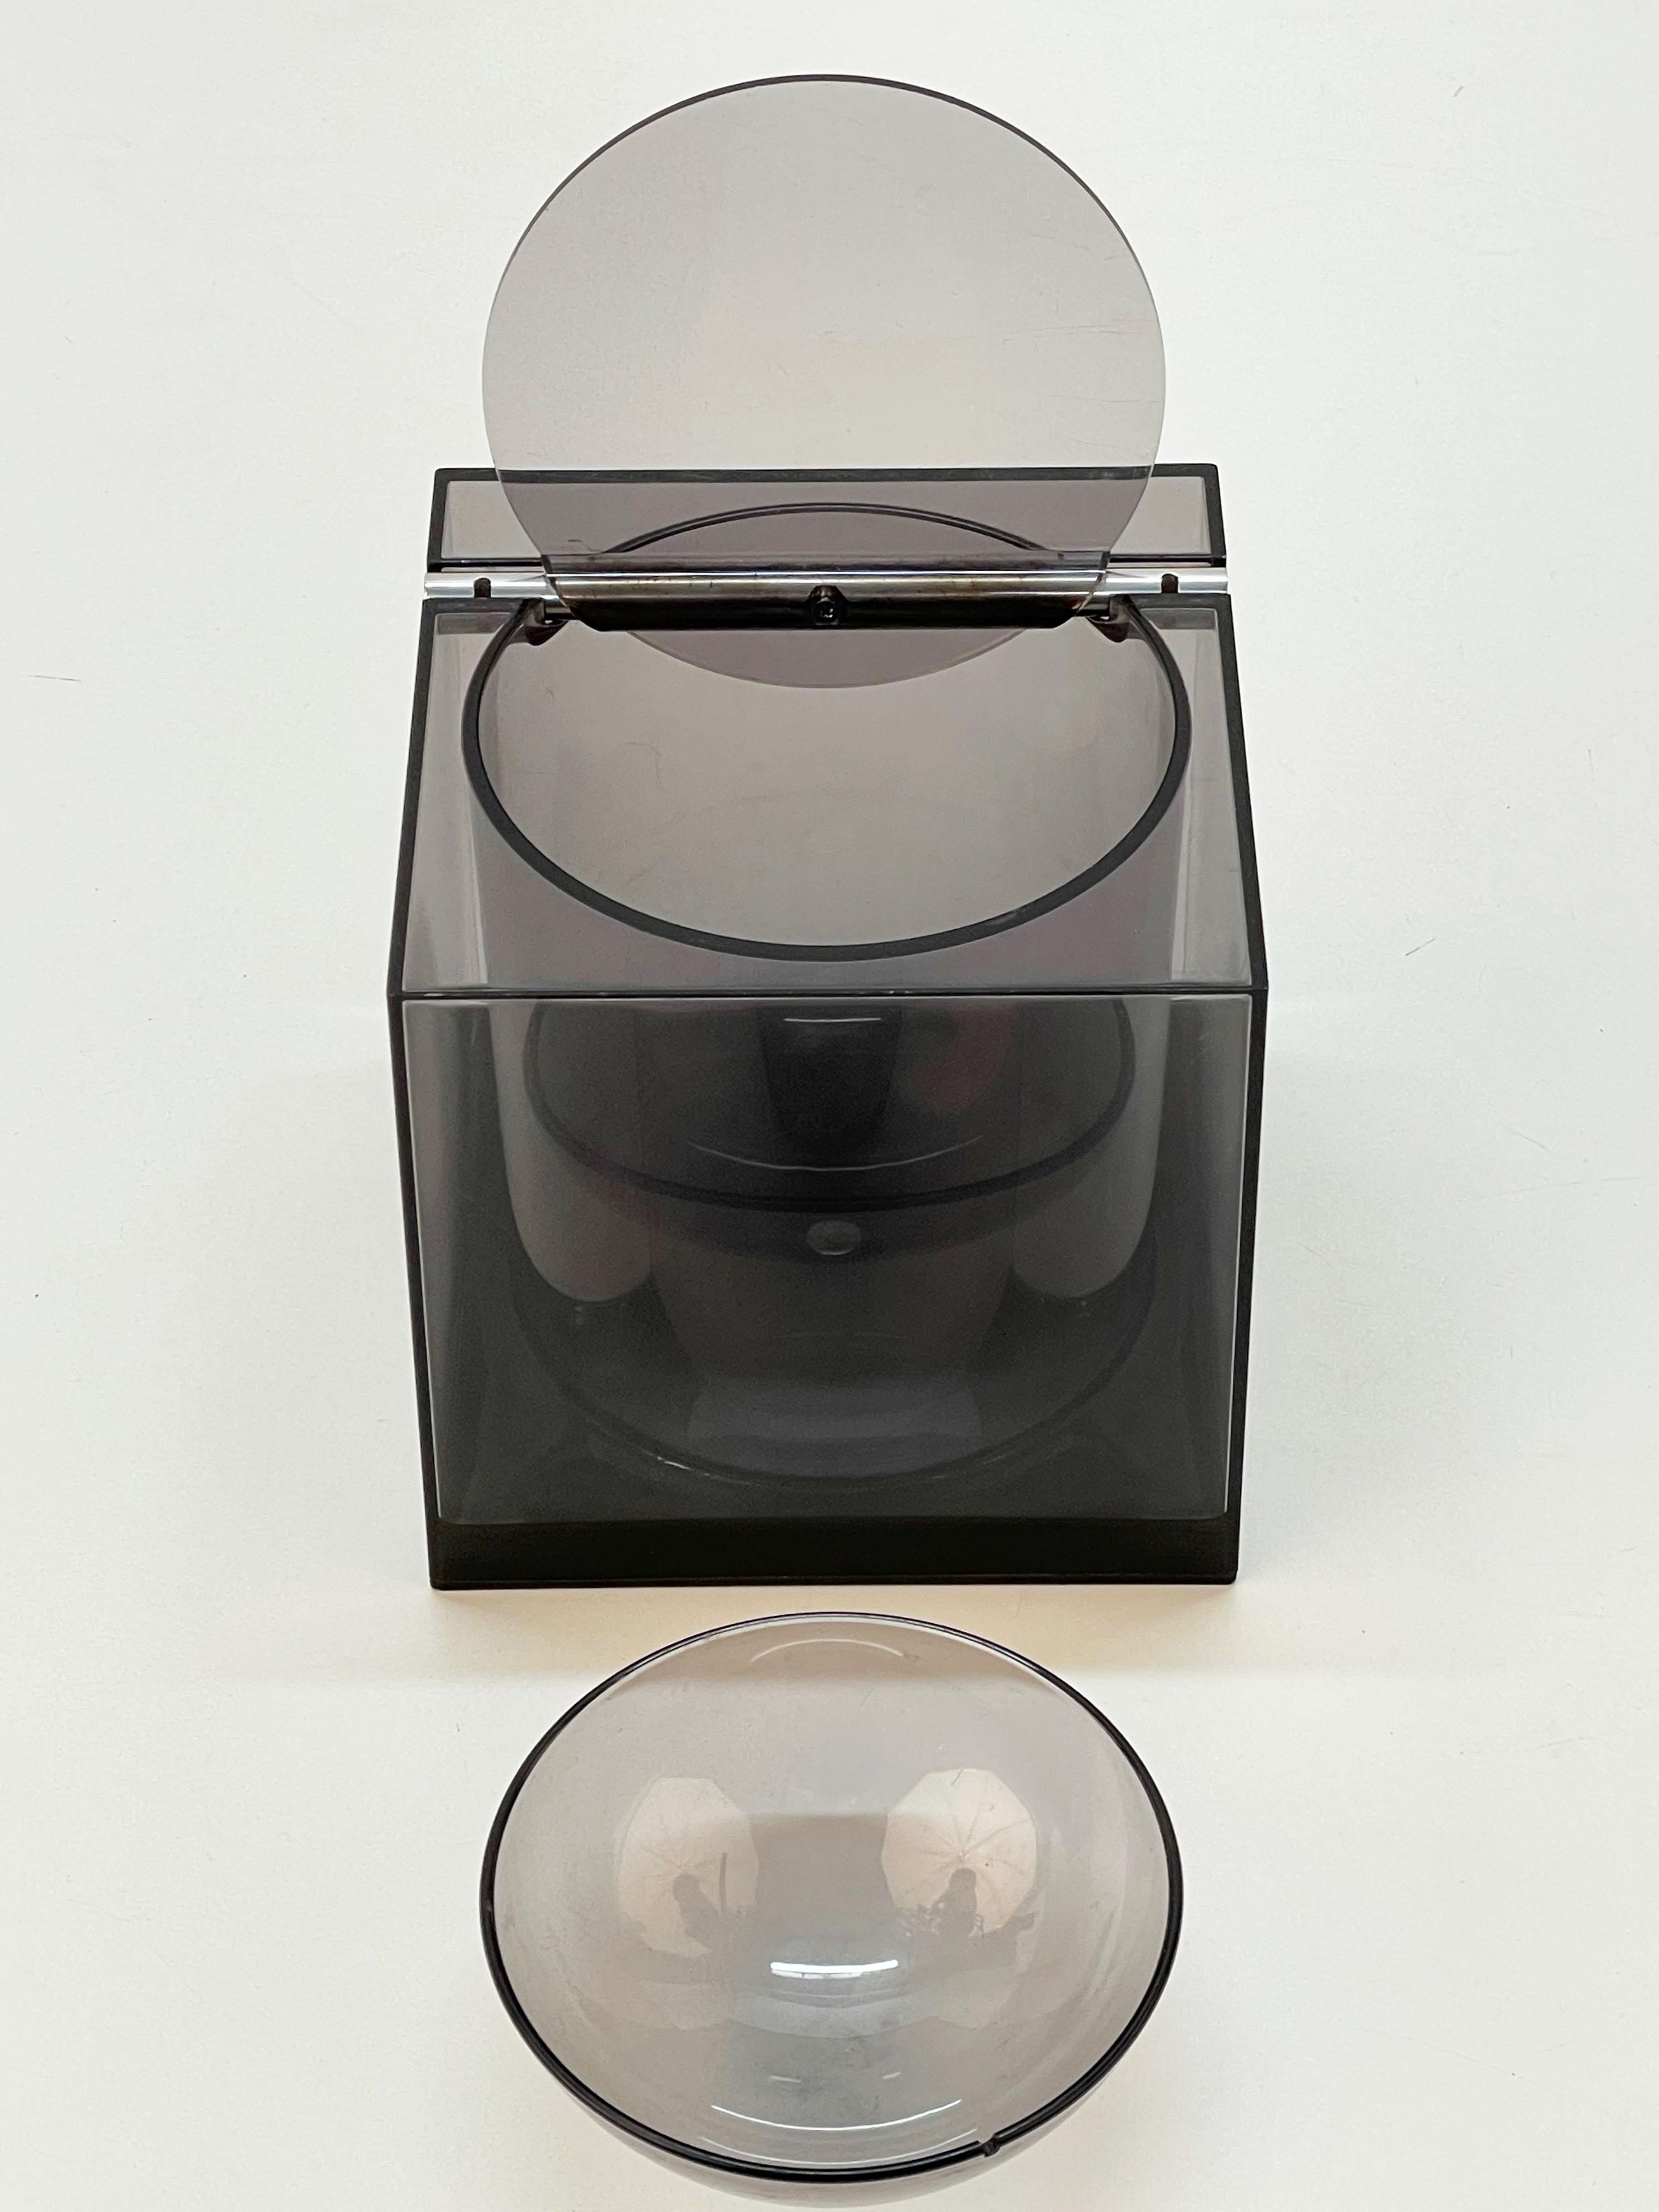 Wonderful mid century smoked acrylic cubic ice bucket for Di Cini & Nils. This amazing item was designed by the Italian Studio Opi, and specifically by Franco Bettonica and Mario Melocchi, in 1974.

This serving piece is astonishing thanks to its